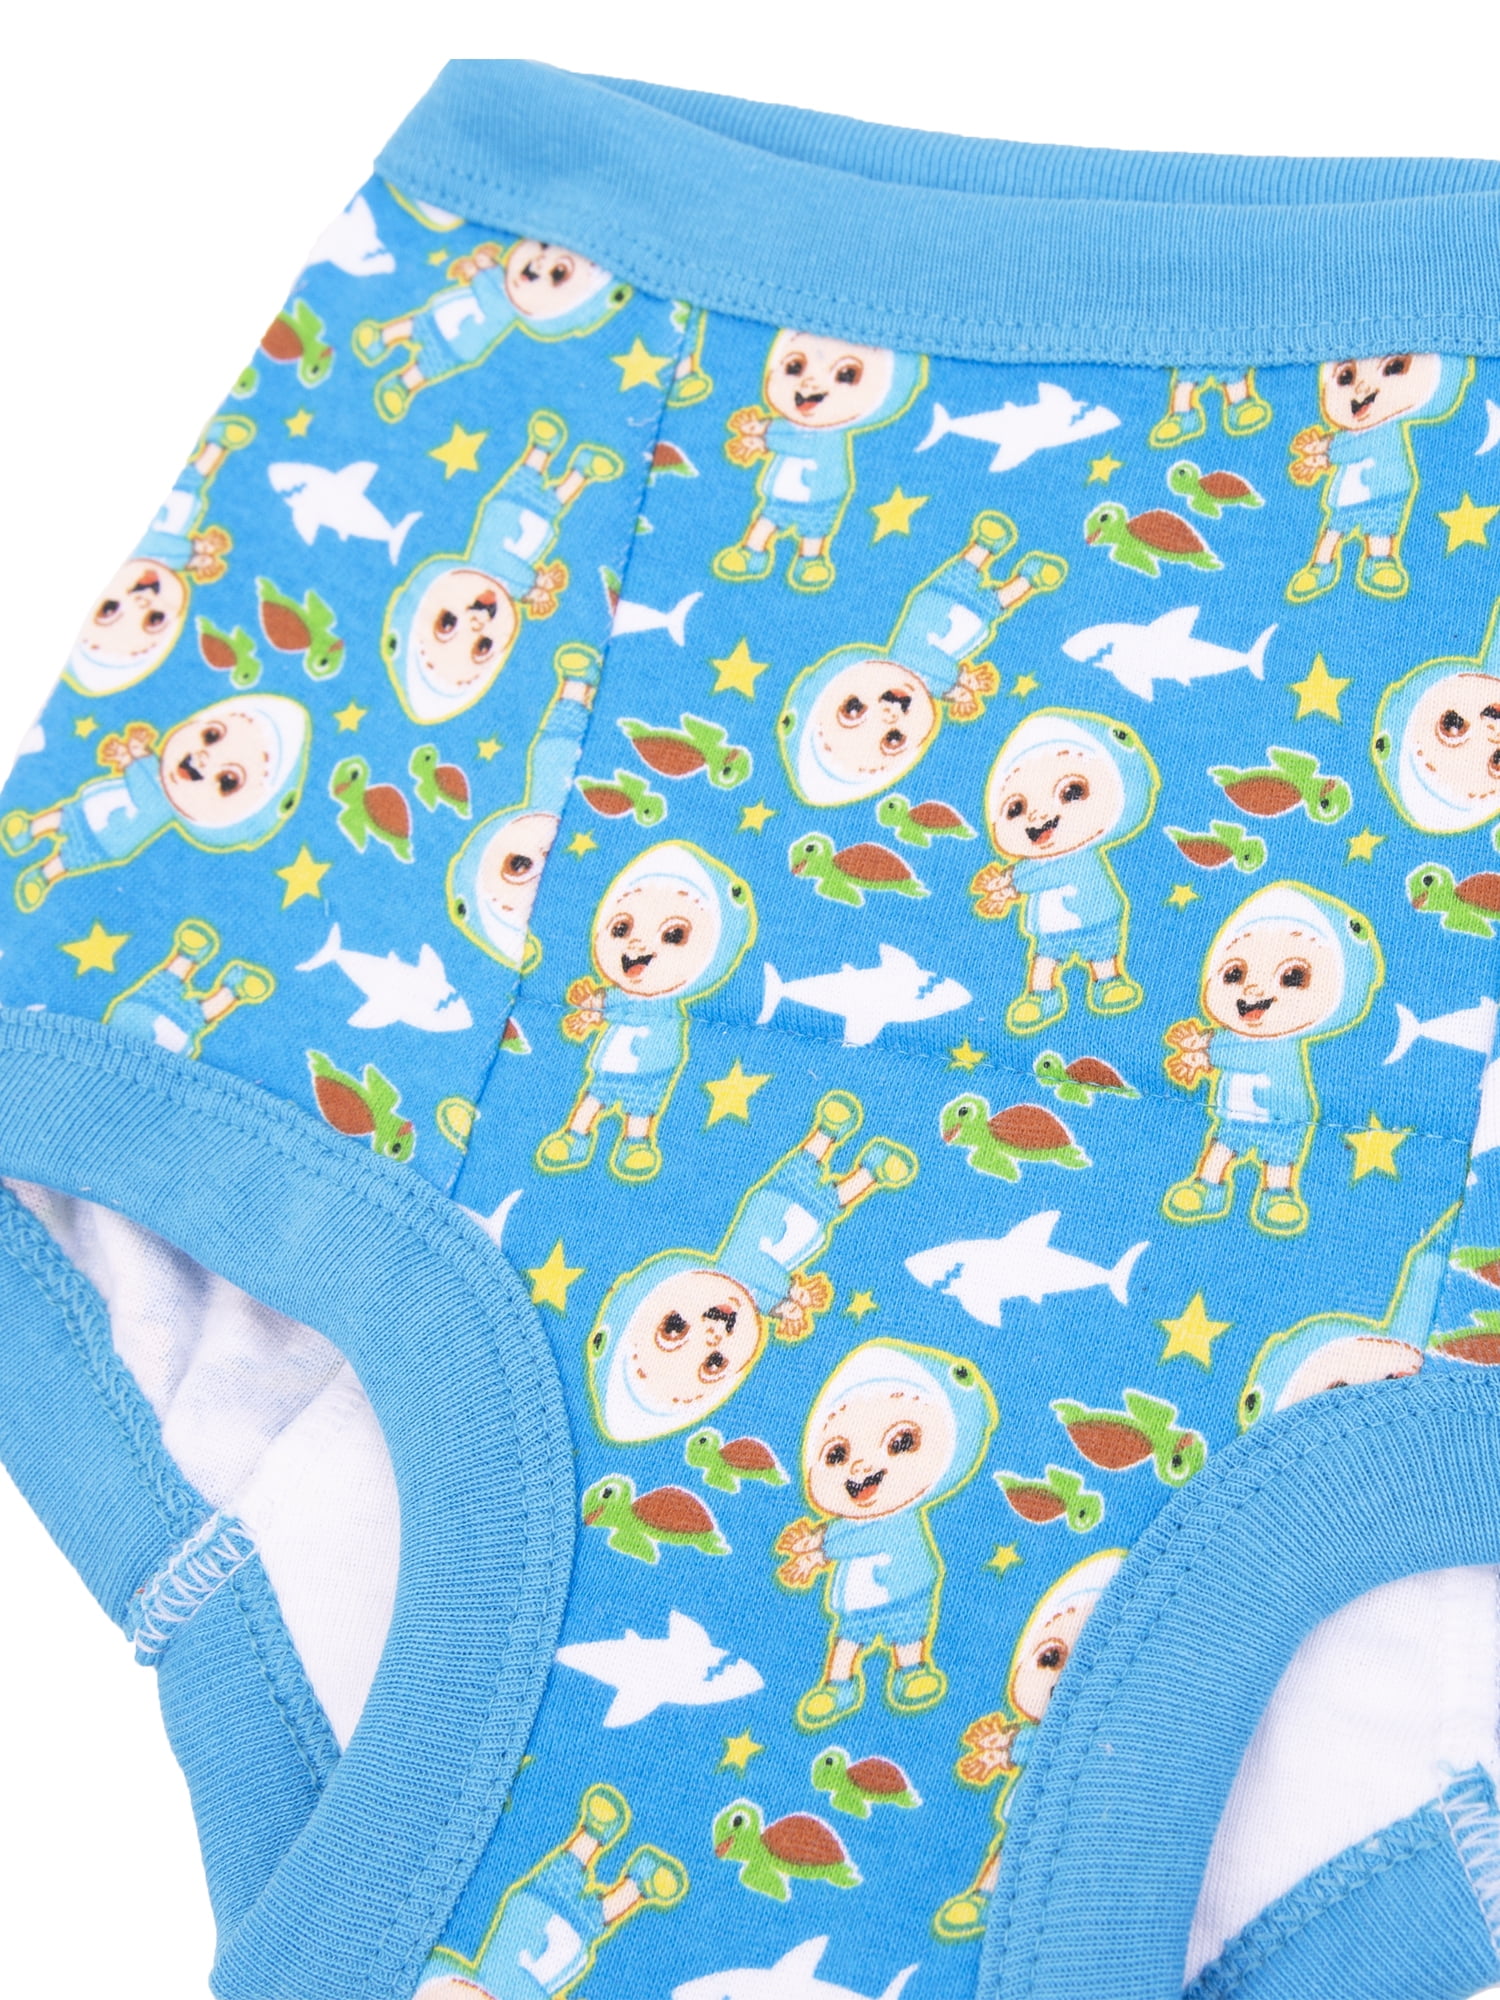 Cocomelon Toddler Boys Briefs 6-Pack Underwear Size 2T - 3T 100